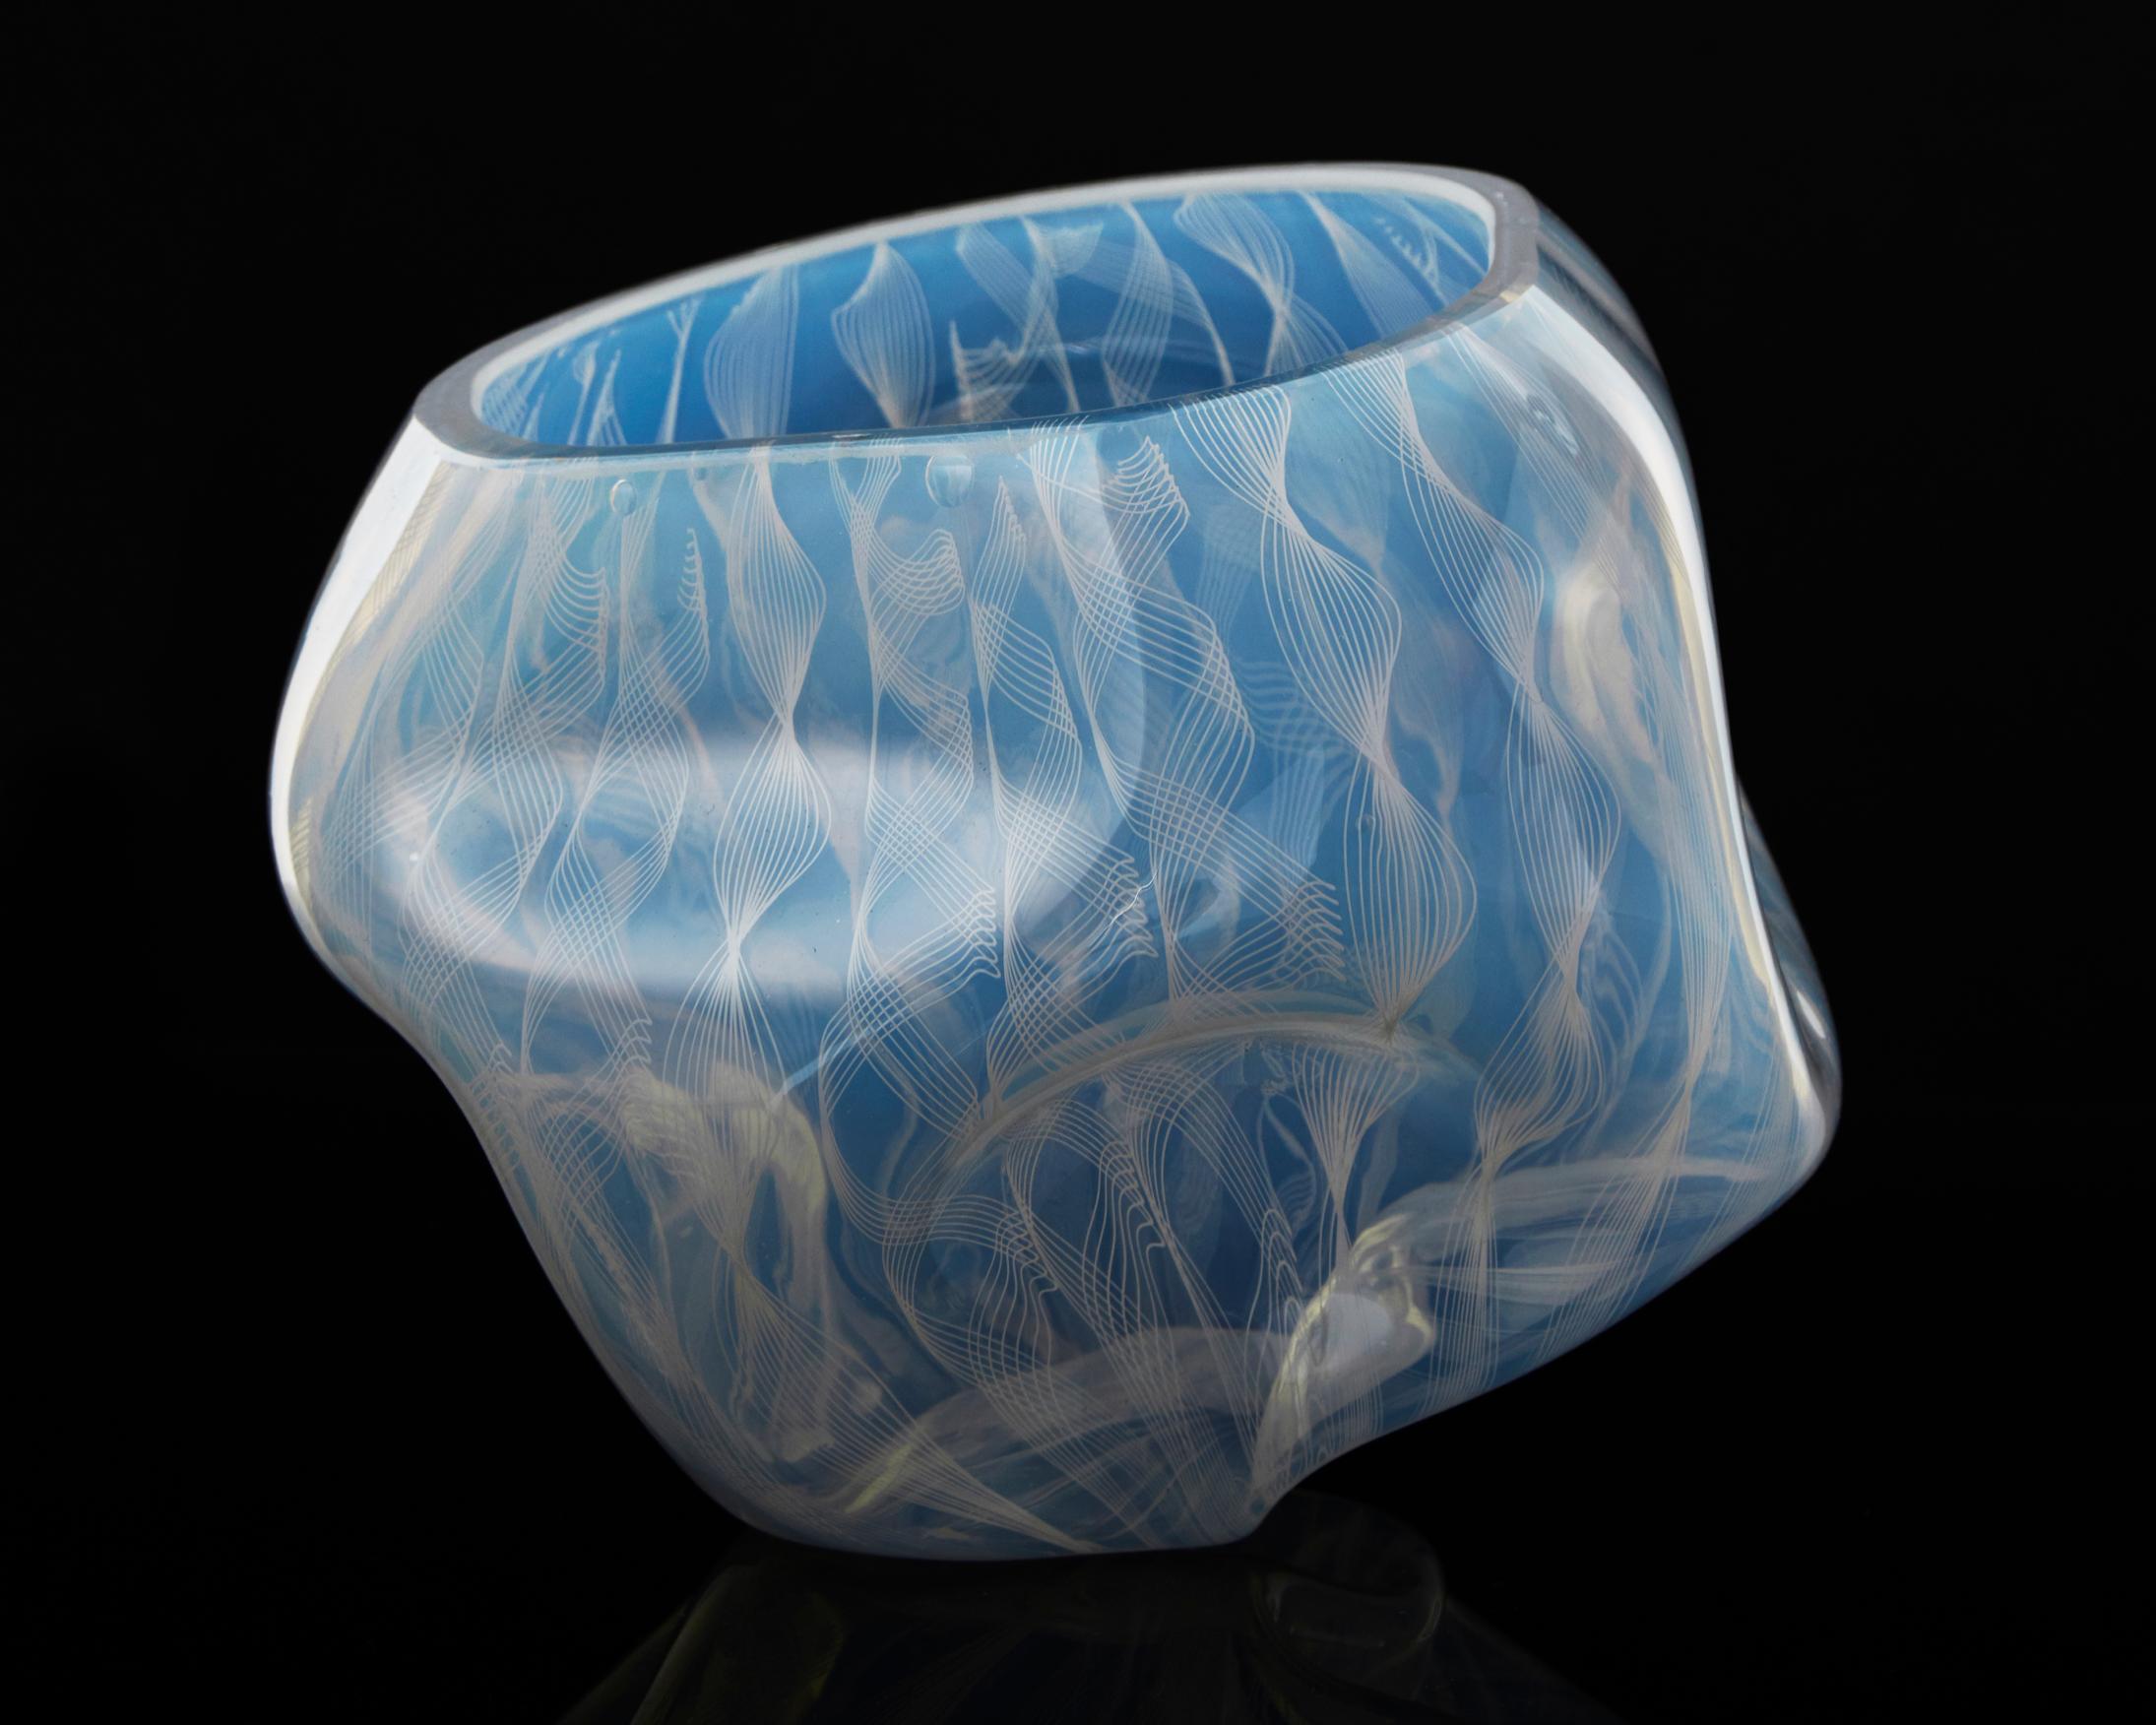 American Unique Crumpled Sculptural Vessel by Jeff Zimmerman and James Mongrain